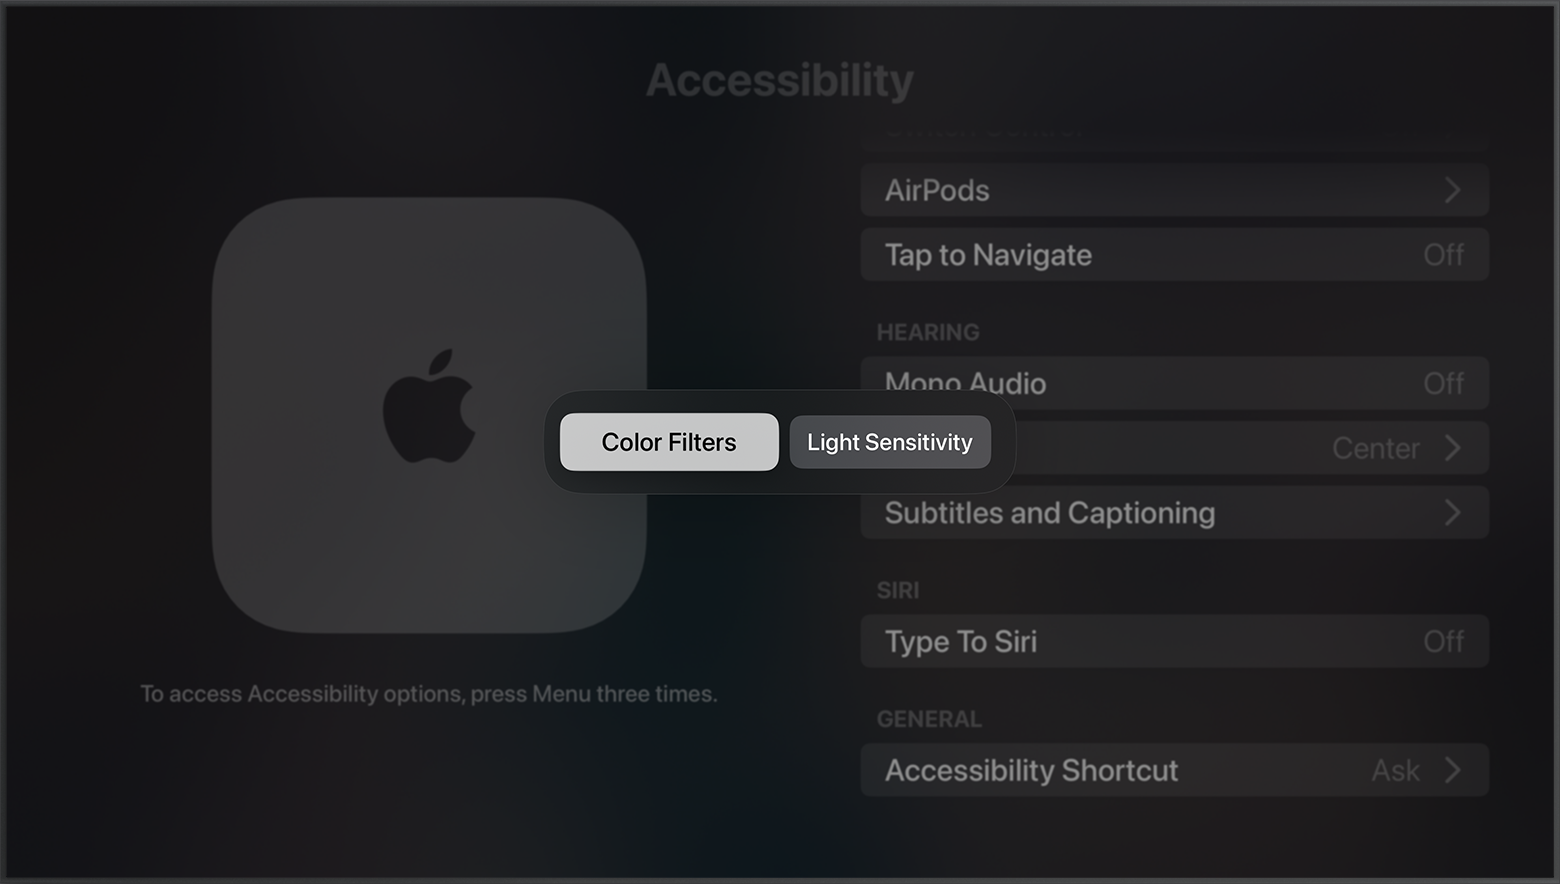 Colour Filters and Light Sensitivity shortcut options appear on the Accessibility screen